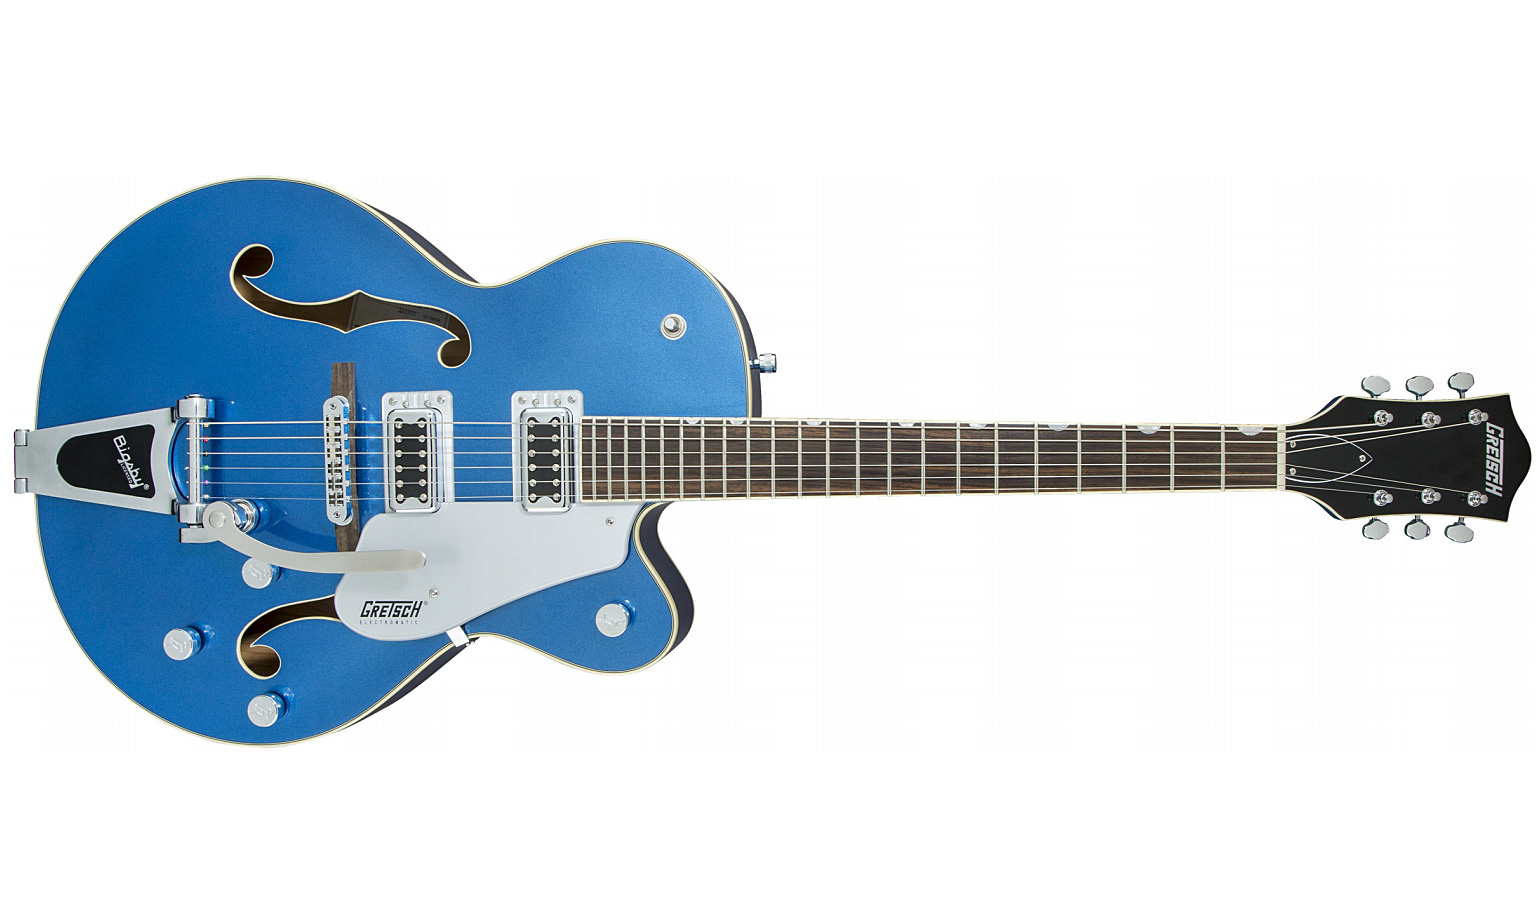 Gretsch G5420t Electromatic Hollow Body 2016 - Fairlane Blue - Hollow-body electric guitar - Variation 1